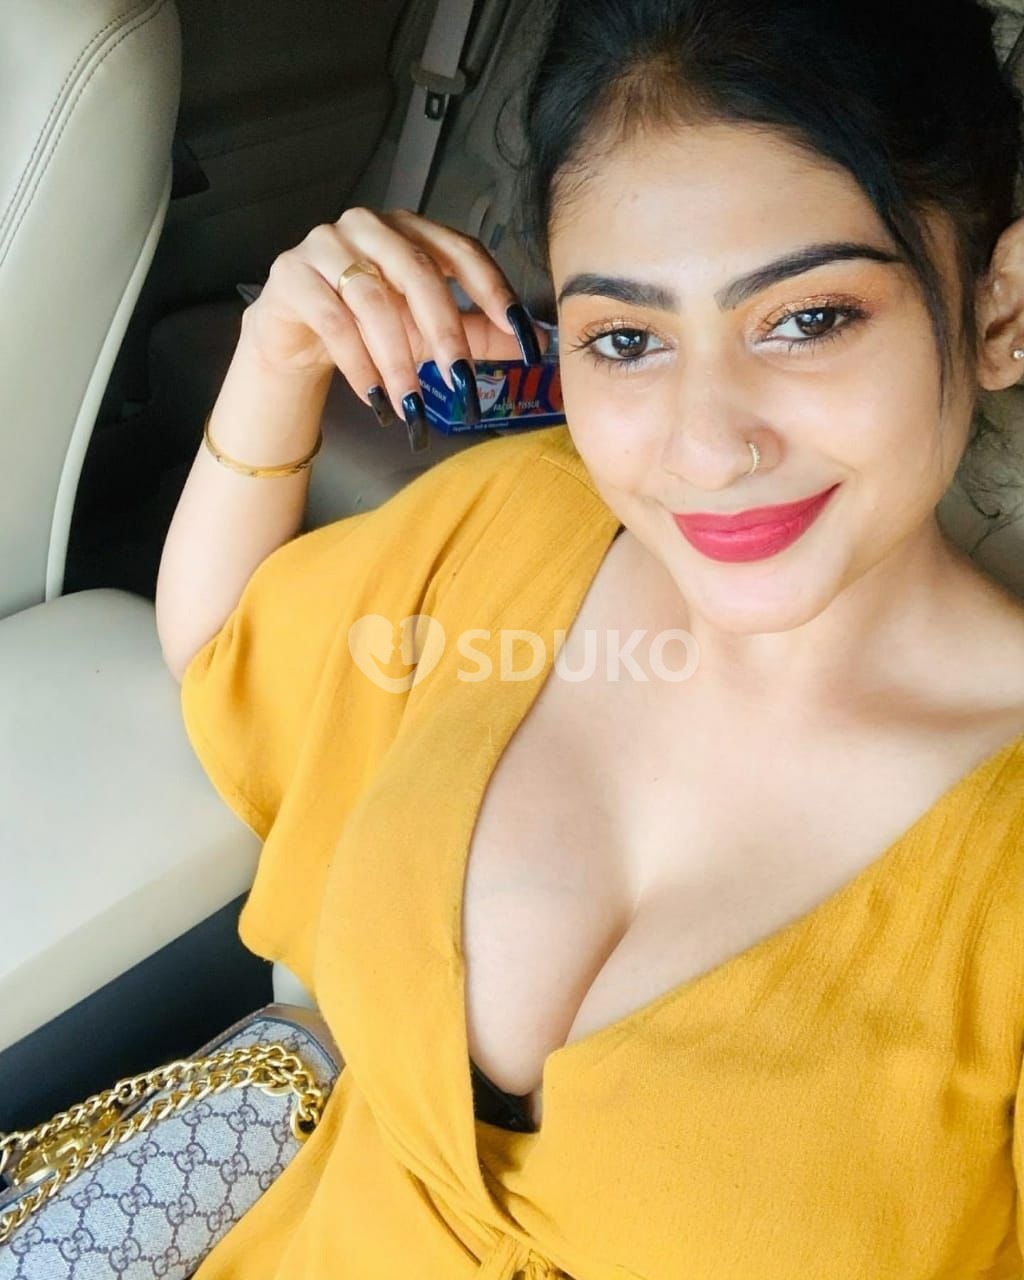 Electronic City 92564/71656 now available call girl full safe and secure without condom sucking kissing all services ava